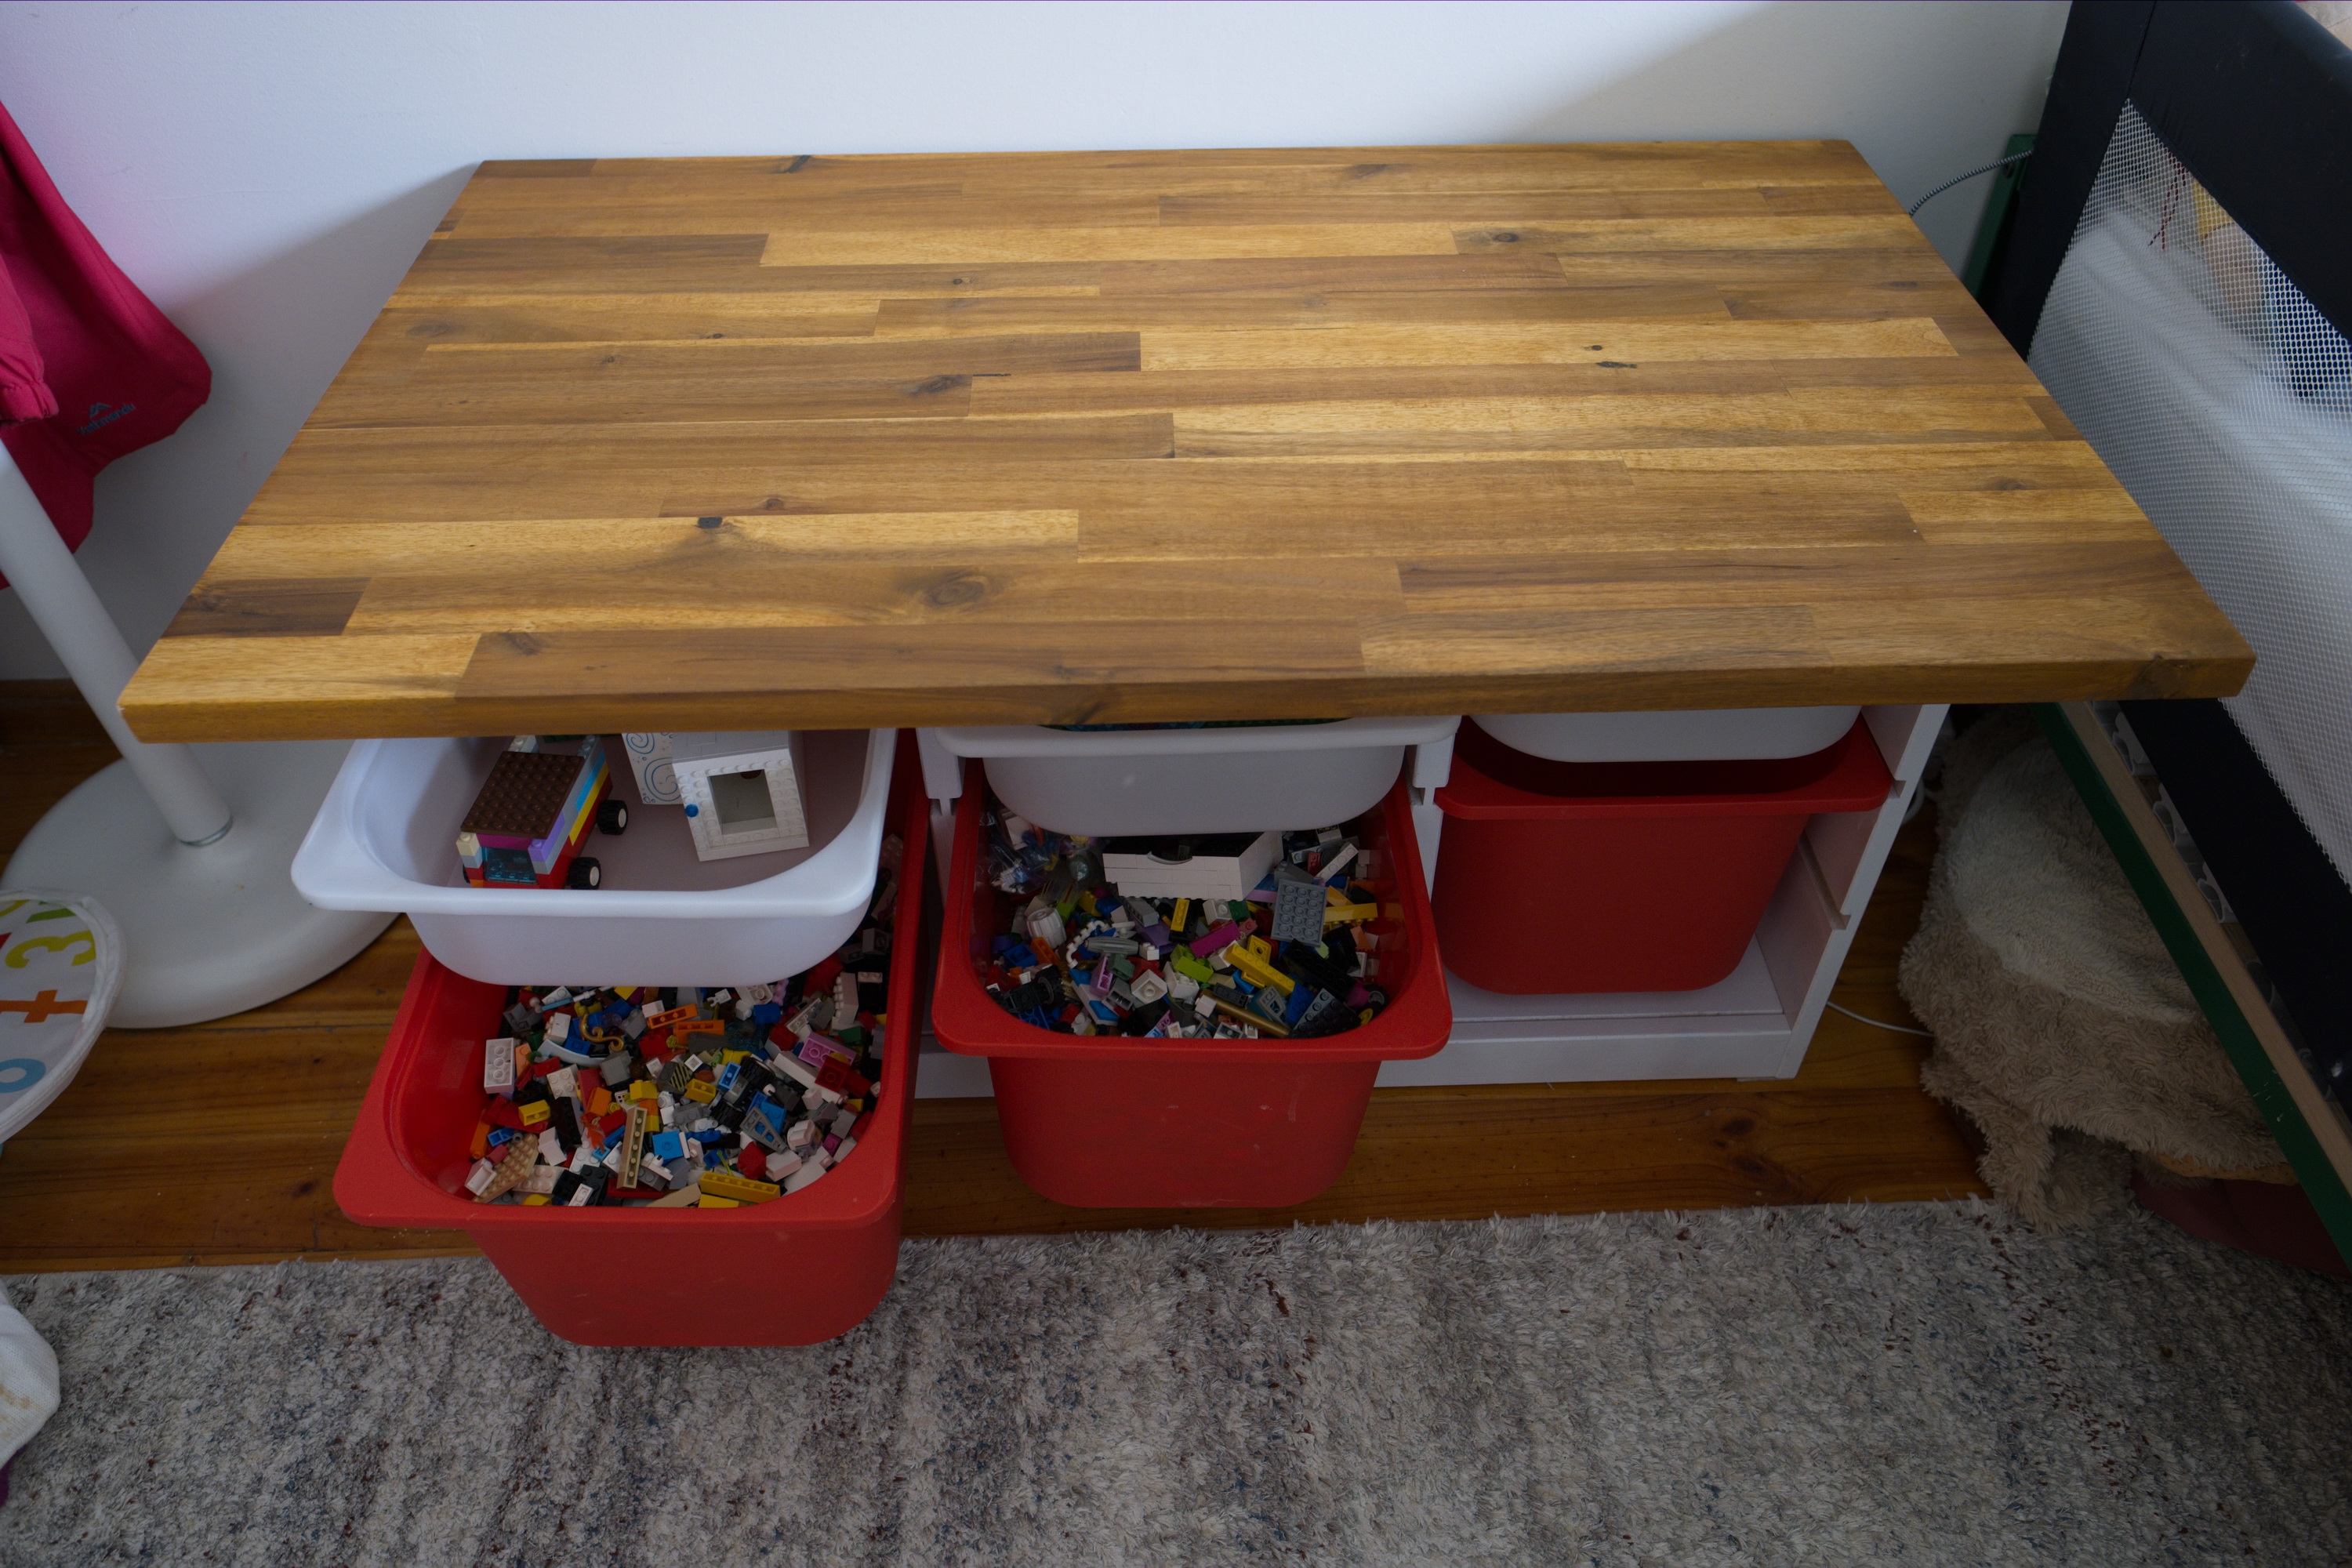 Desk Drawers with Lego